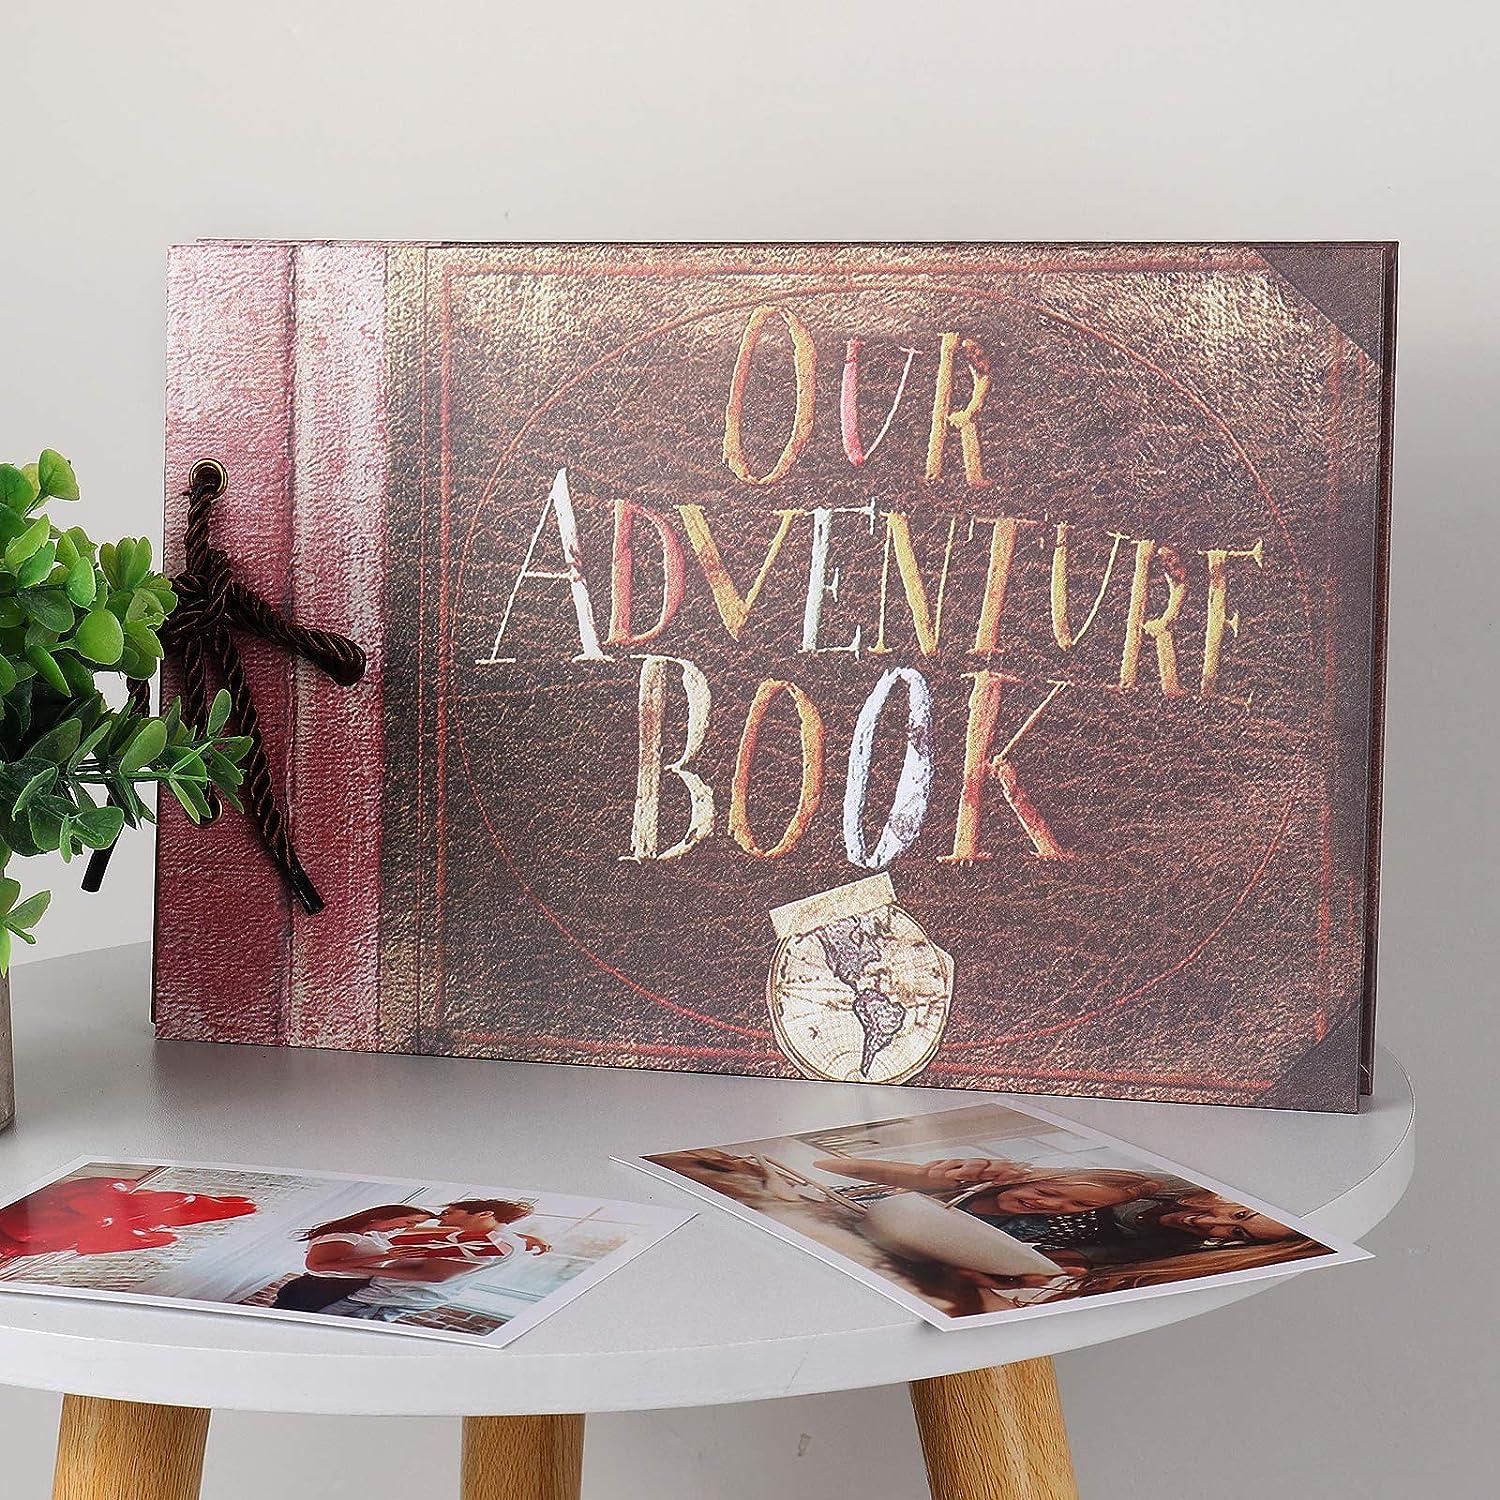 Up: Our Adventure Book